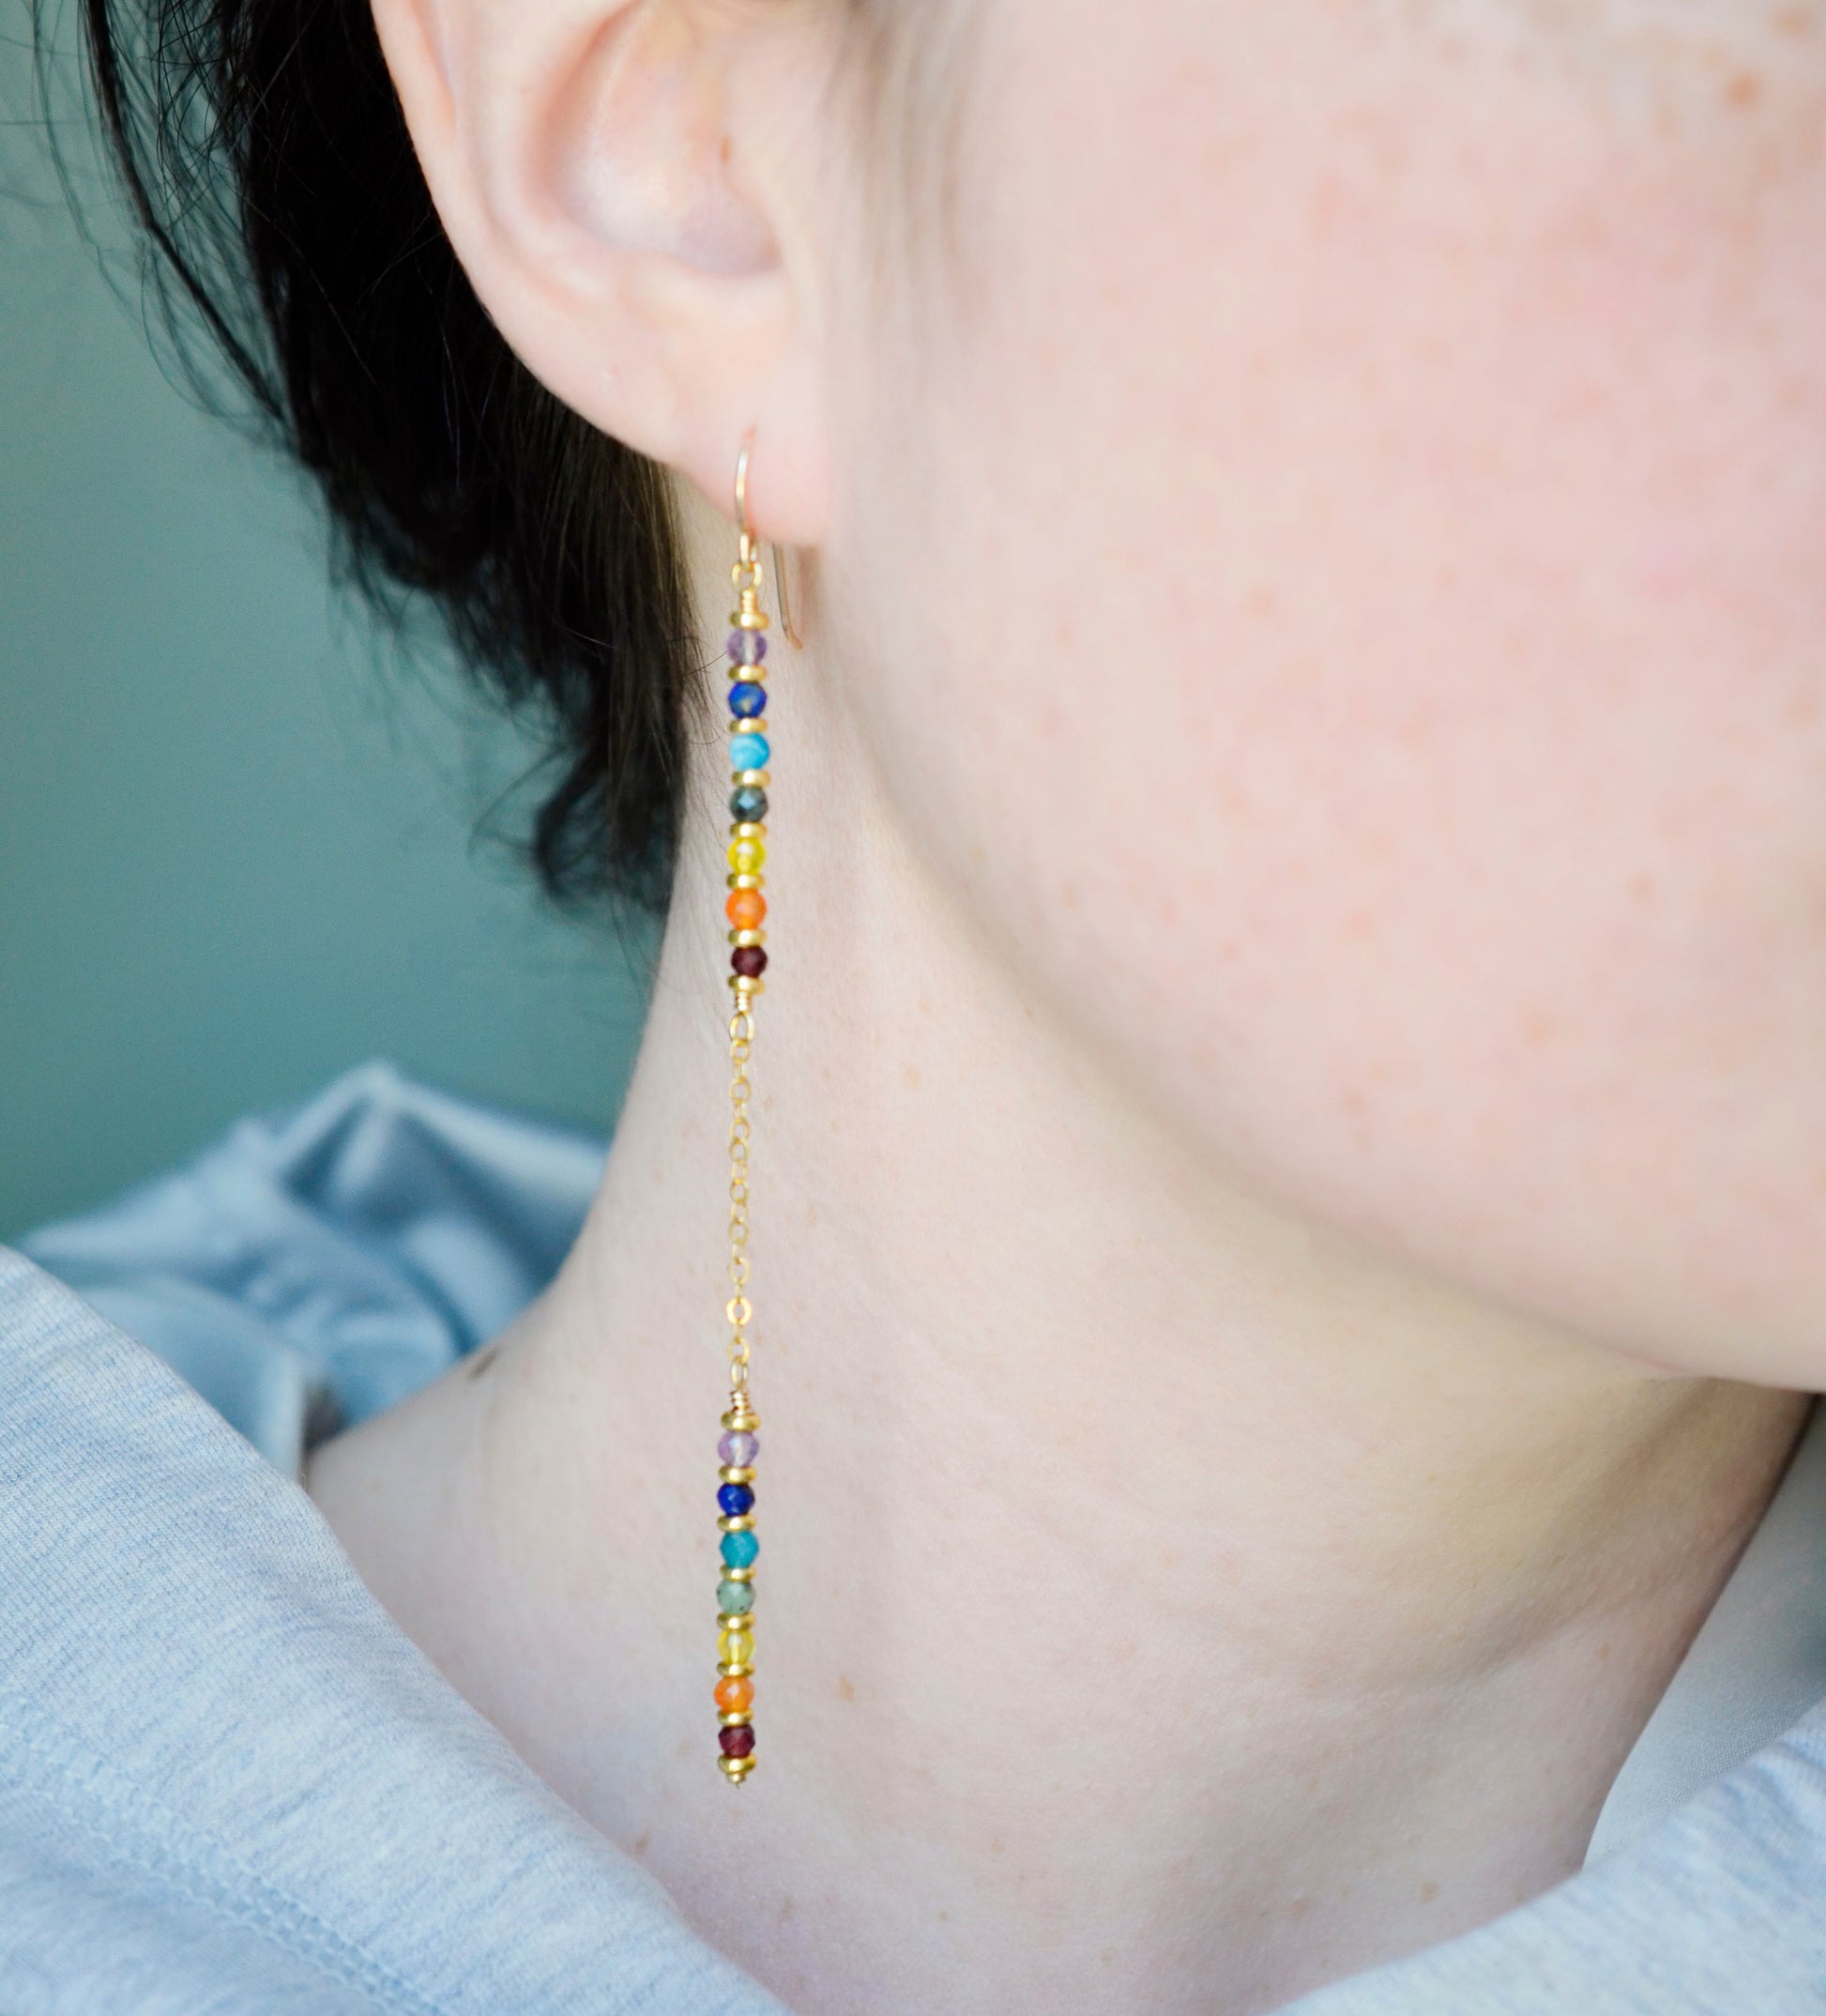 Modeled image. Two long, straight bars of crystals arranged in a rainbow pattern separated by a dainty chain. The gold style is shown. 